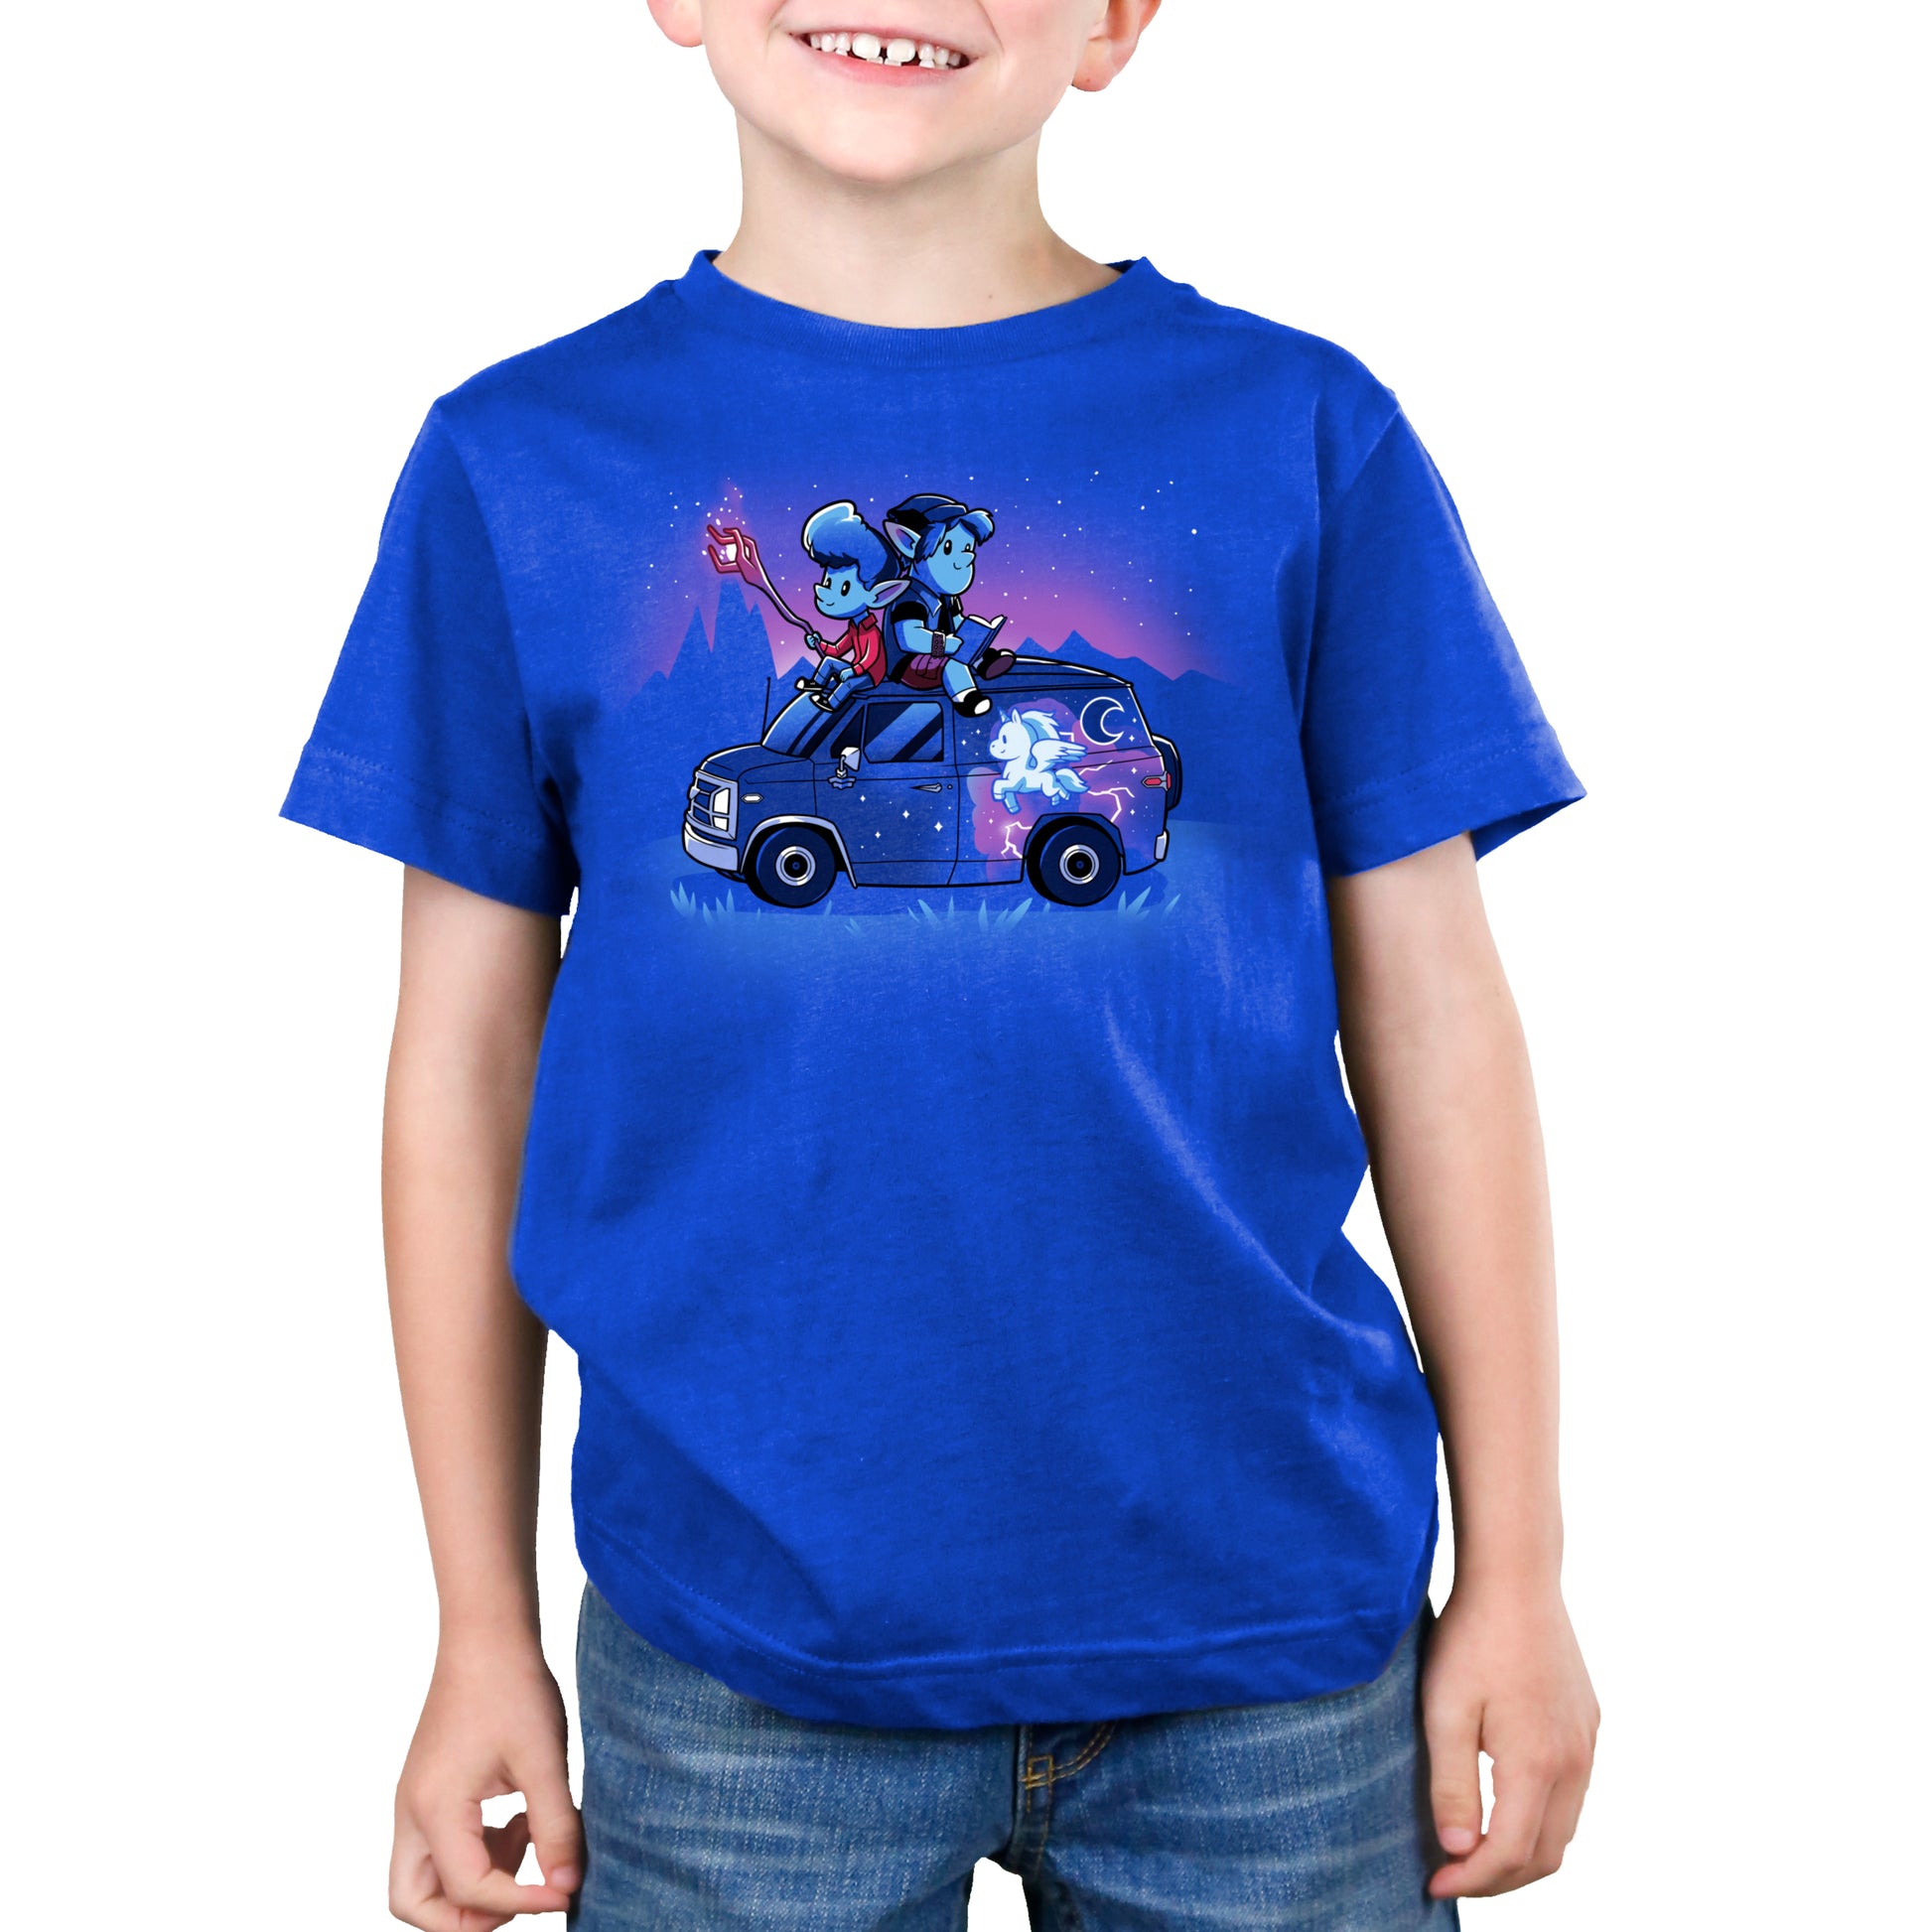 A young boy wearing an officially licensed Disney t-shirt featuring the movie "Onward.